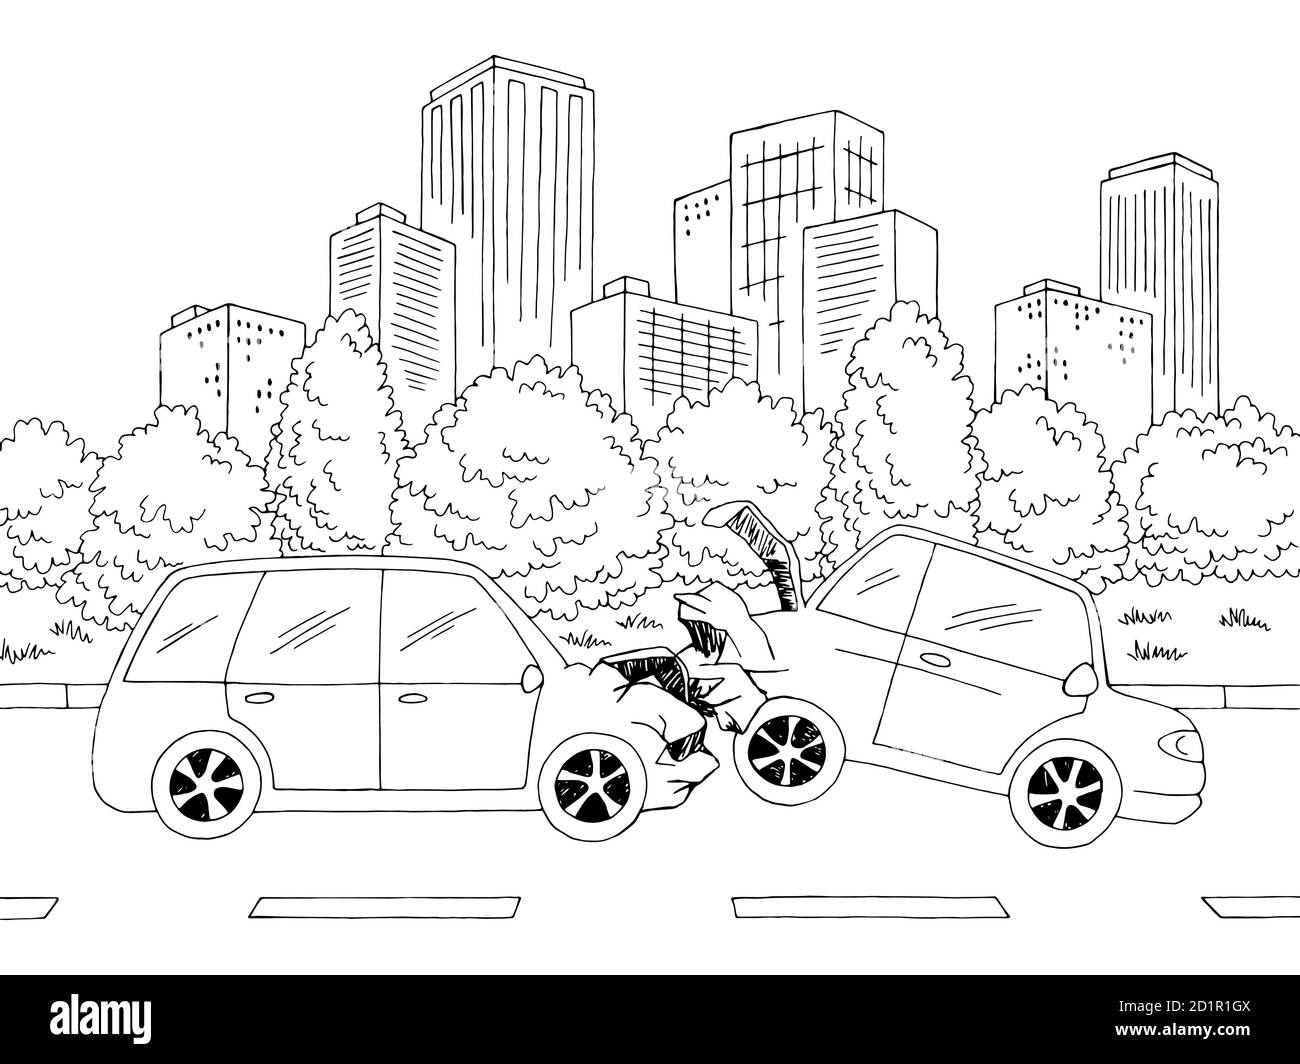 car crash how to draw  Google Search  Scene drawing Car drawings Art  reference